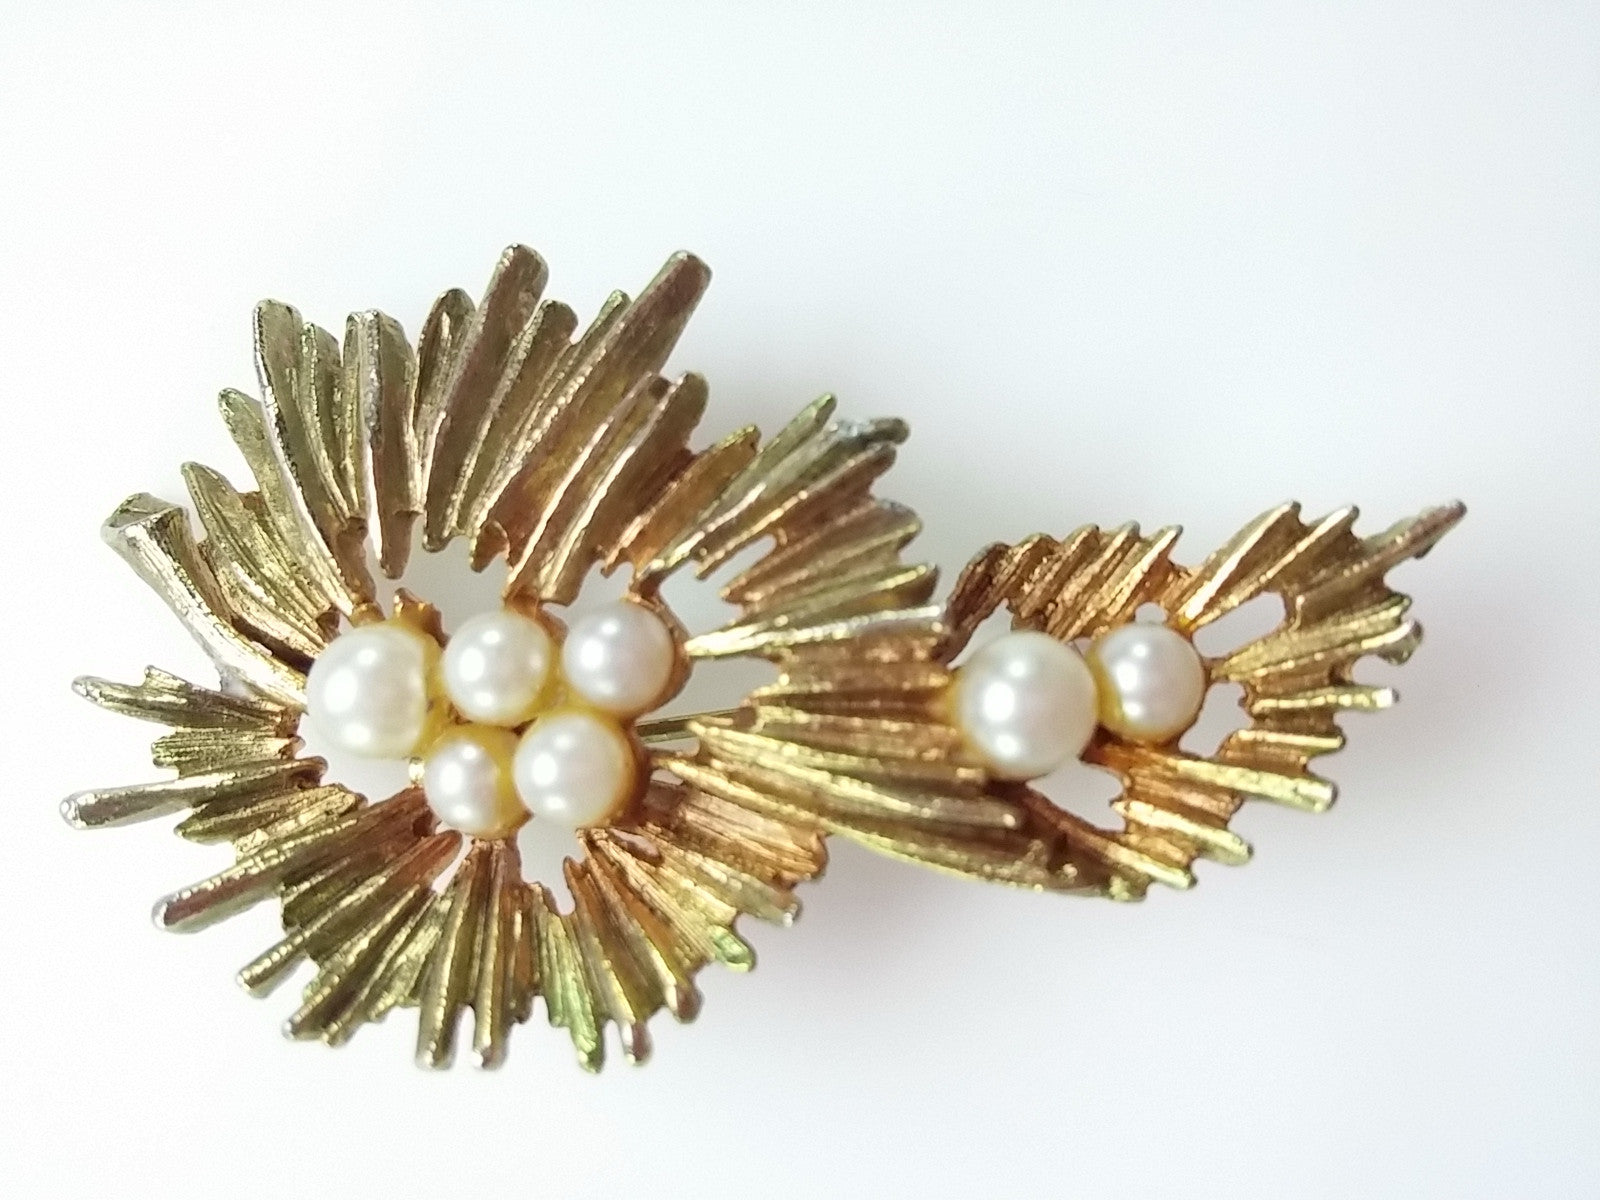 Vintage Brooch Mid Century Modern Abstract Two Tone Starburst Pearl Center - Dirty 30 Vintage